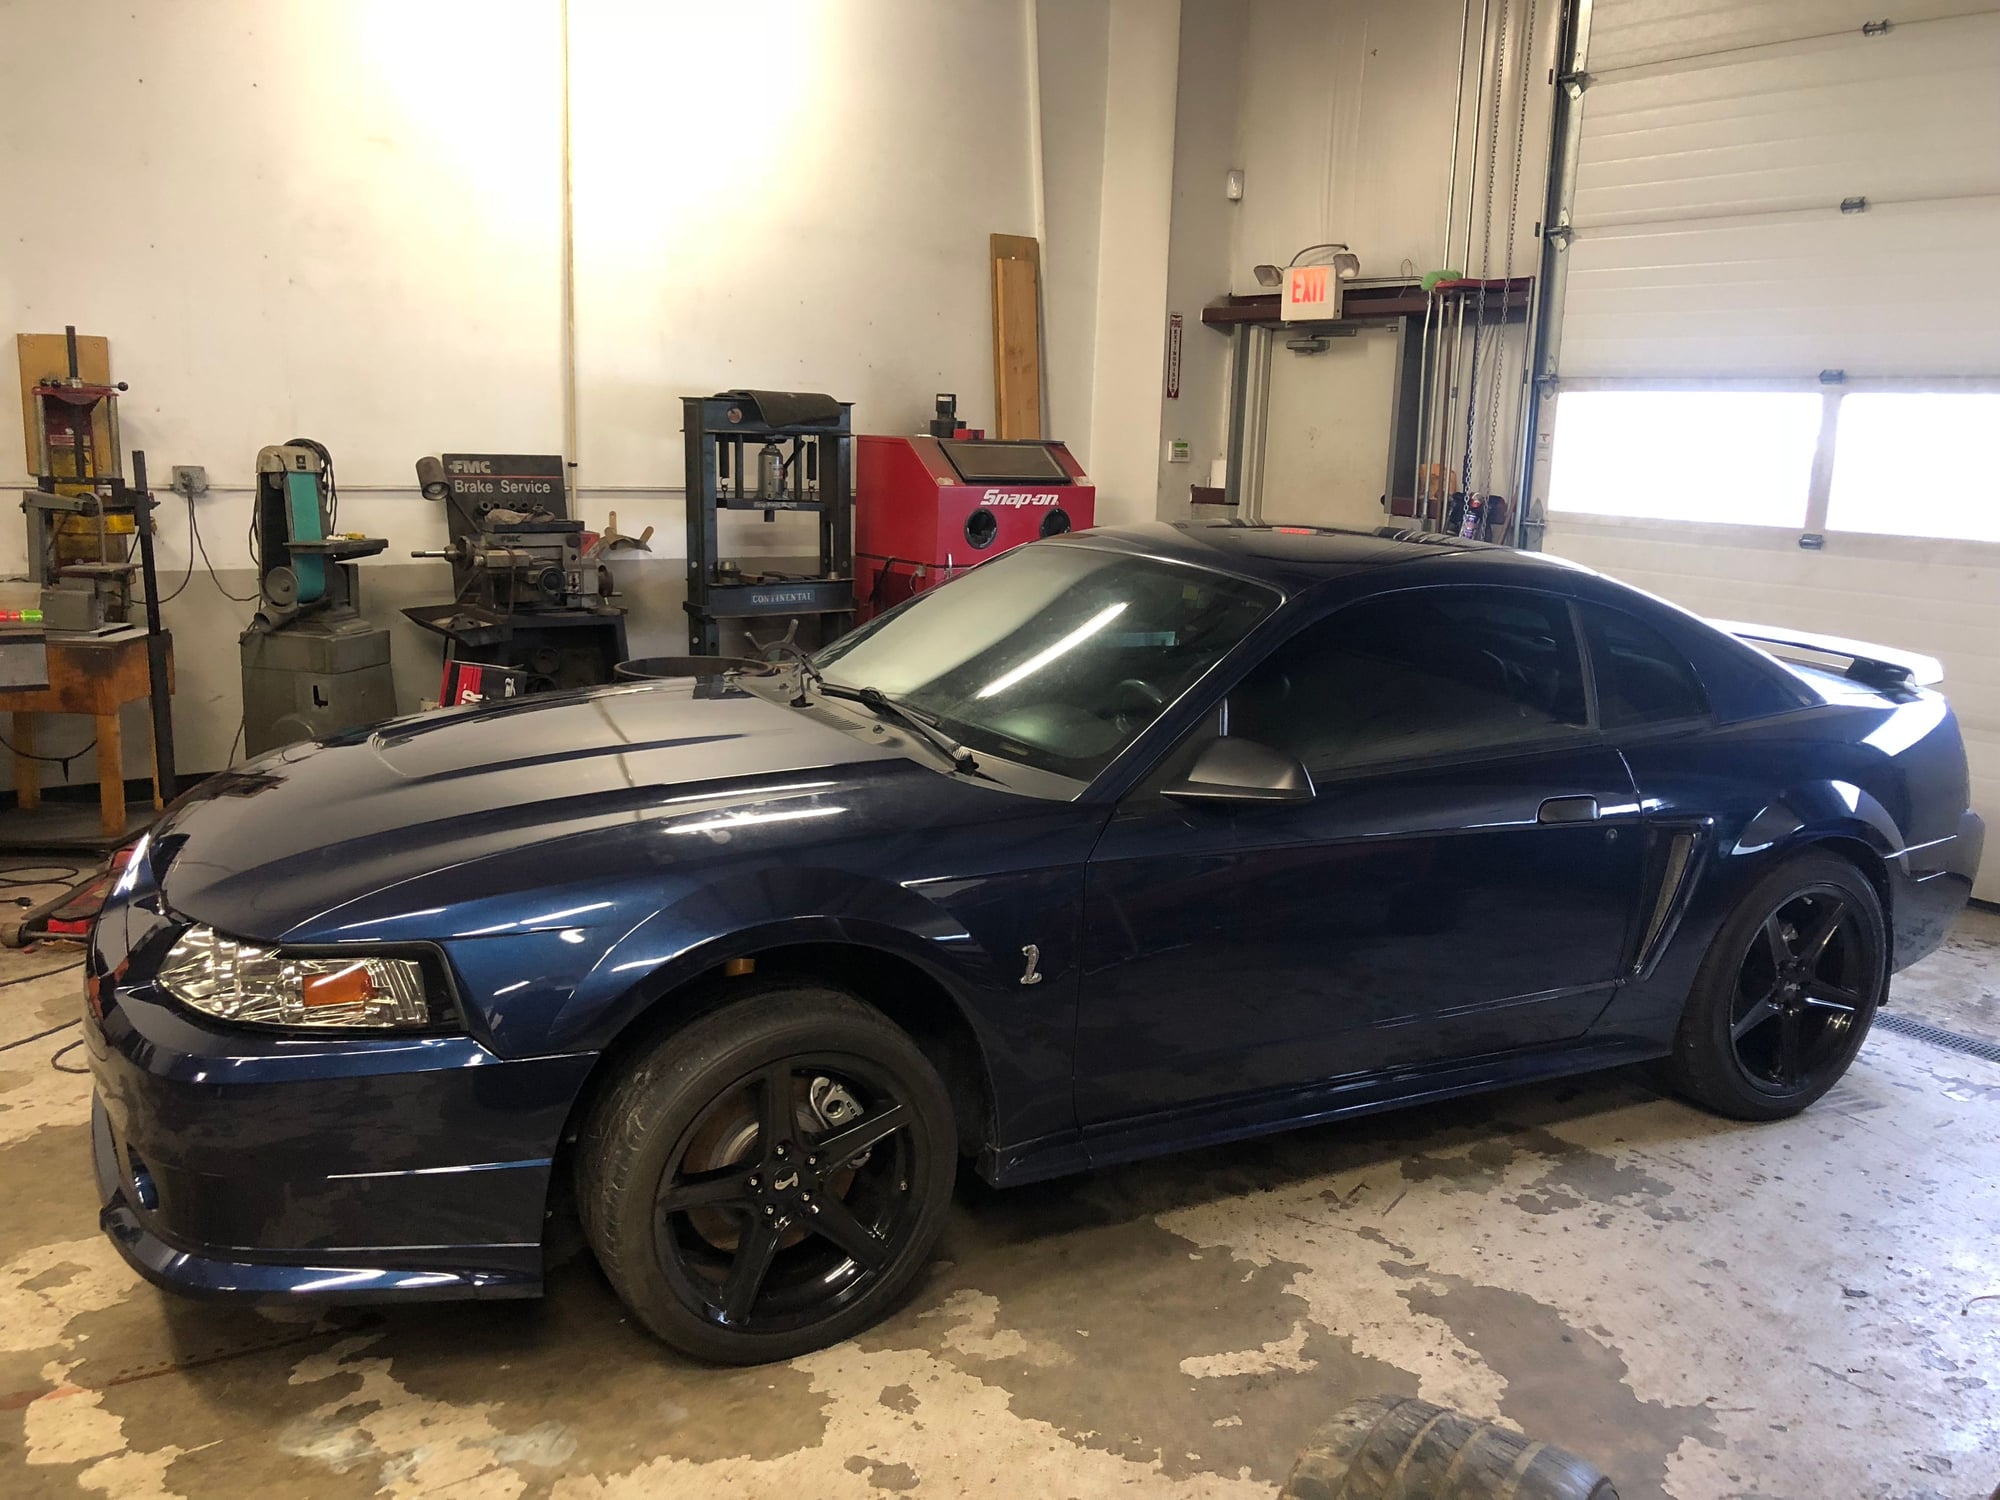 2001 Ford Mustang - 2001 Mustang Cobra rolling chassis - Used - VIN 1FAFP47V41F250277 - 91,050 Miles - Danbury, CT 06810, United States